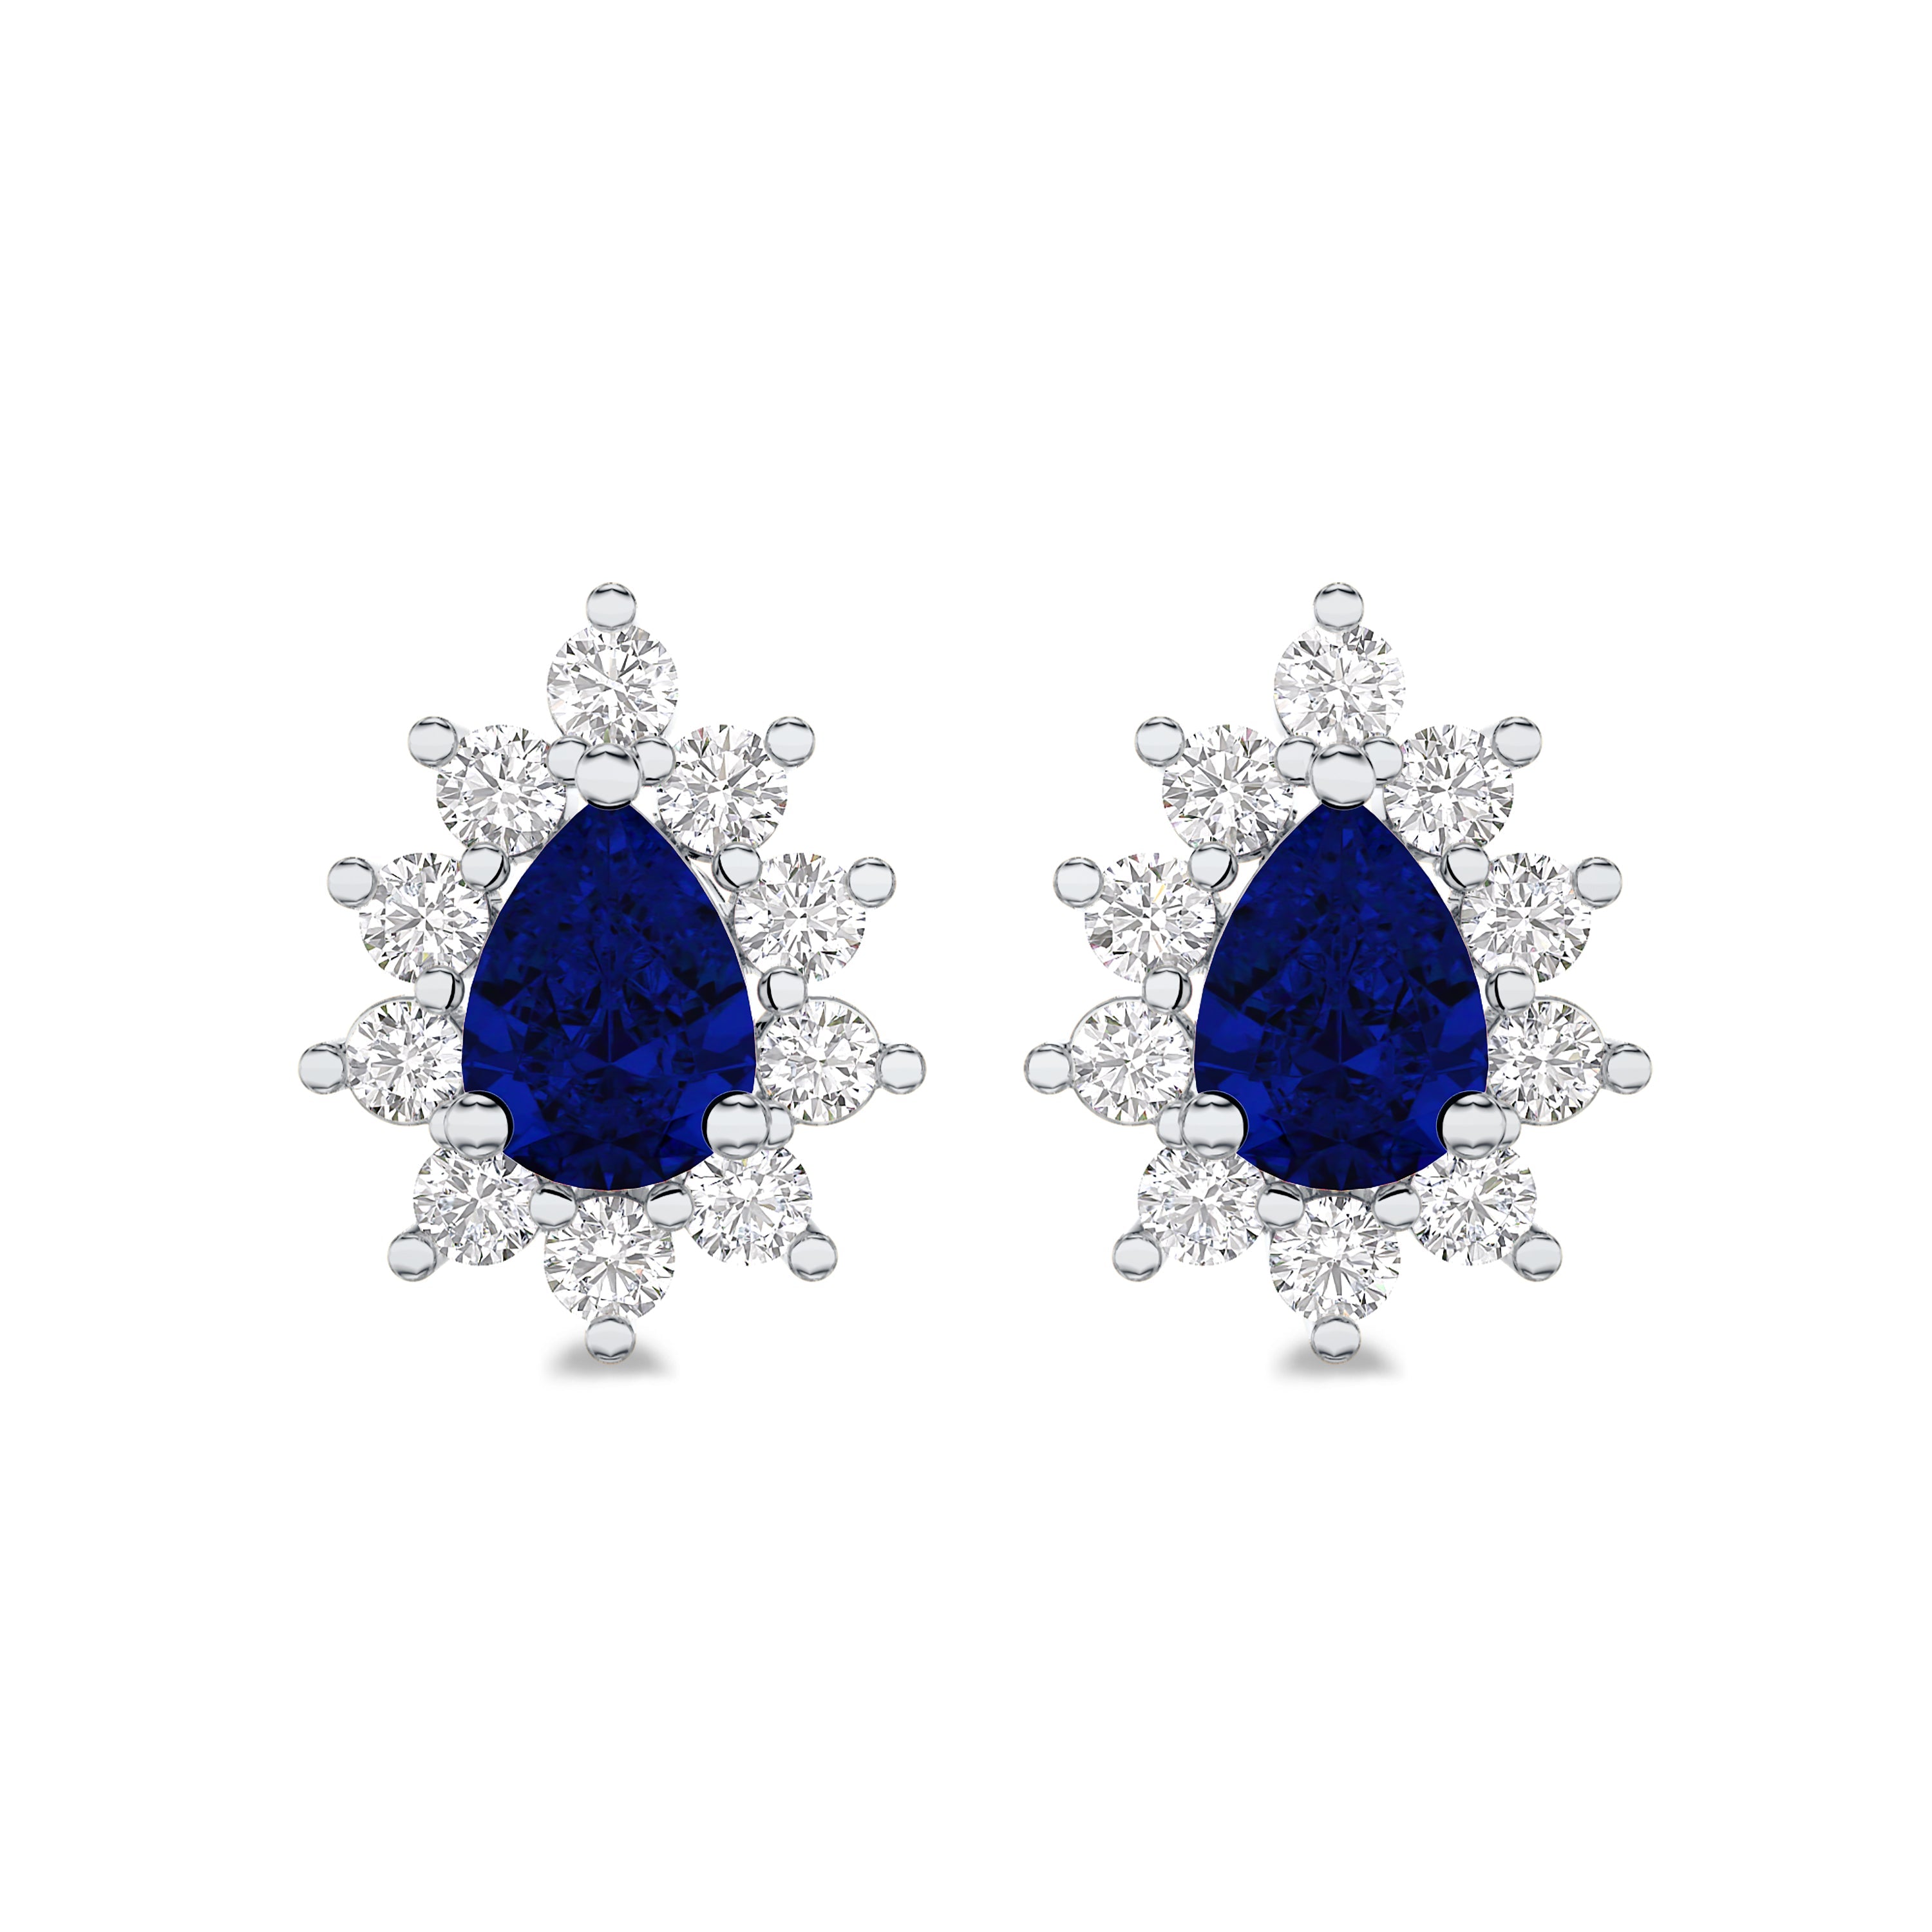 18K white gold earrings with 0.90 carat diamond and 1.48 carat sapphire, FG color and SI clarity